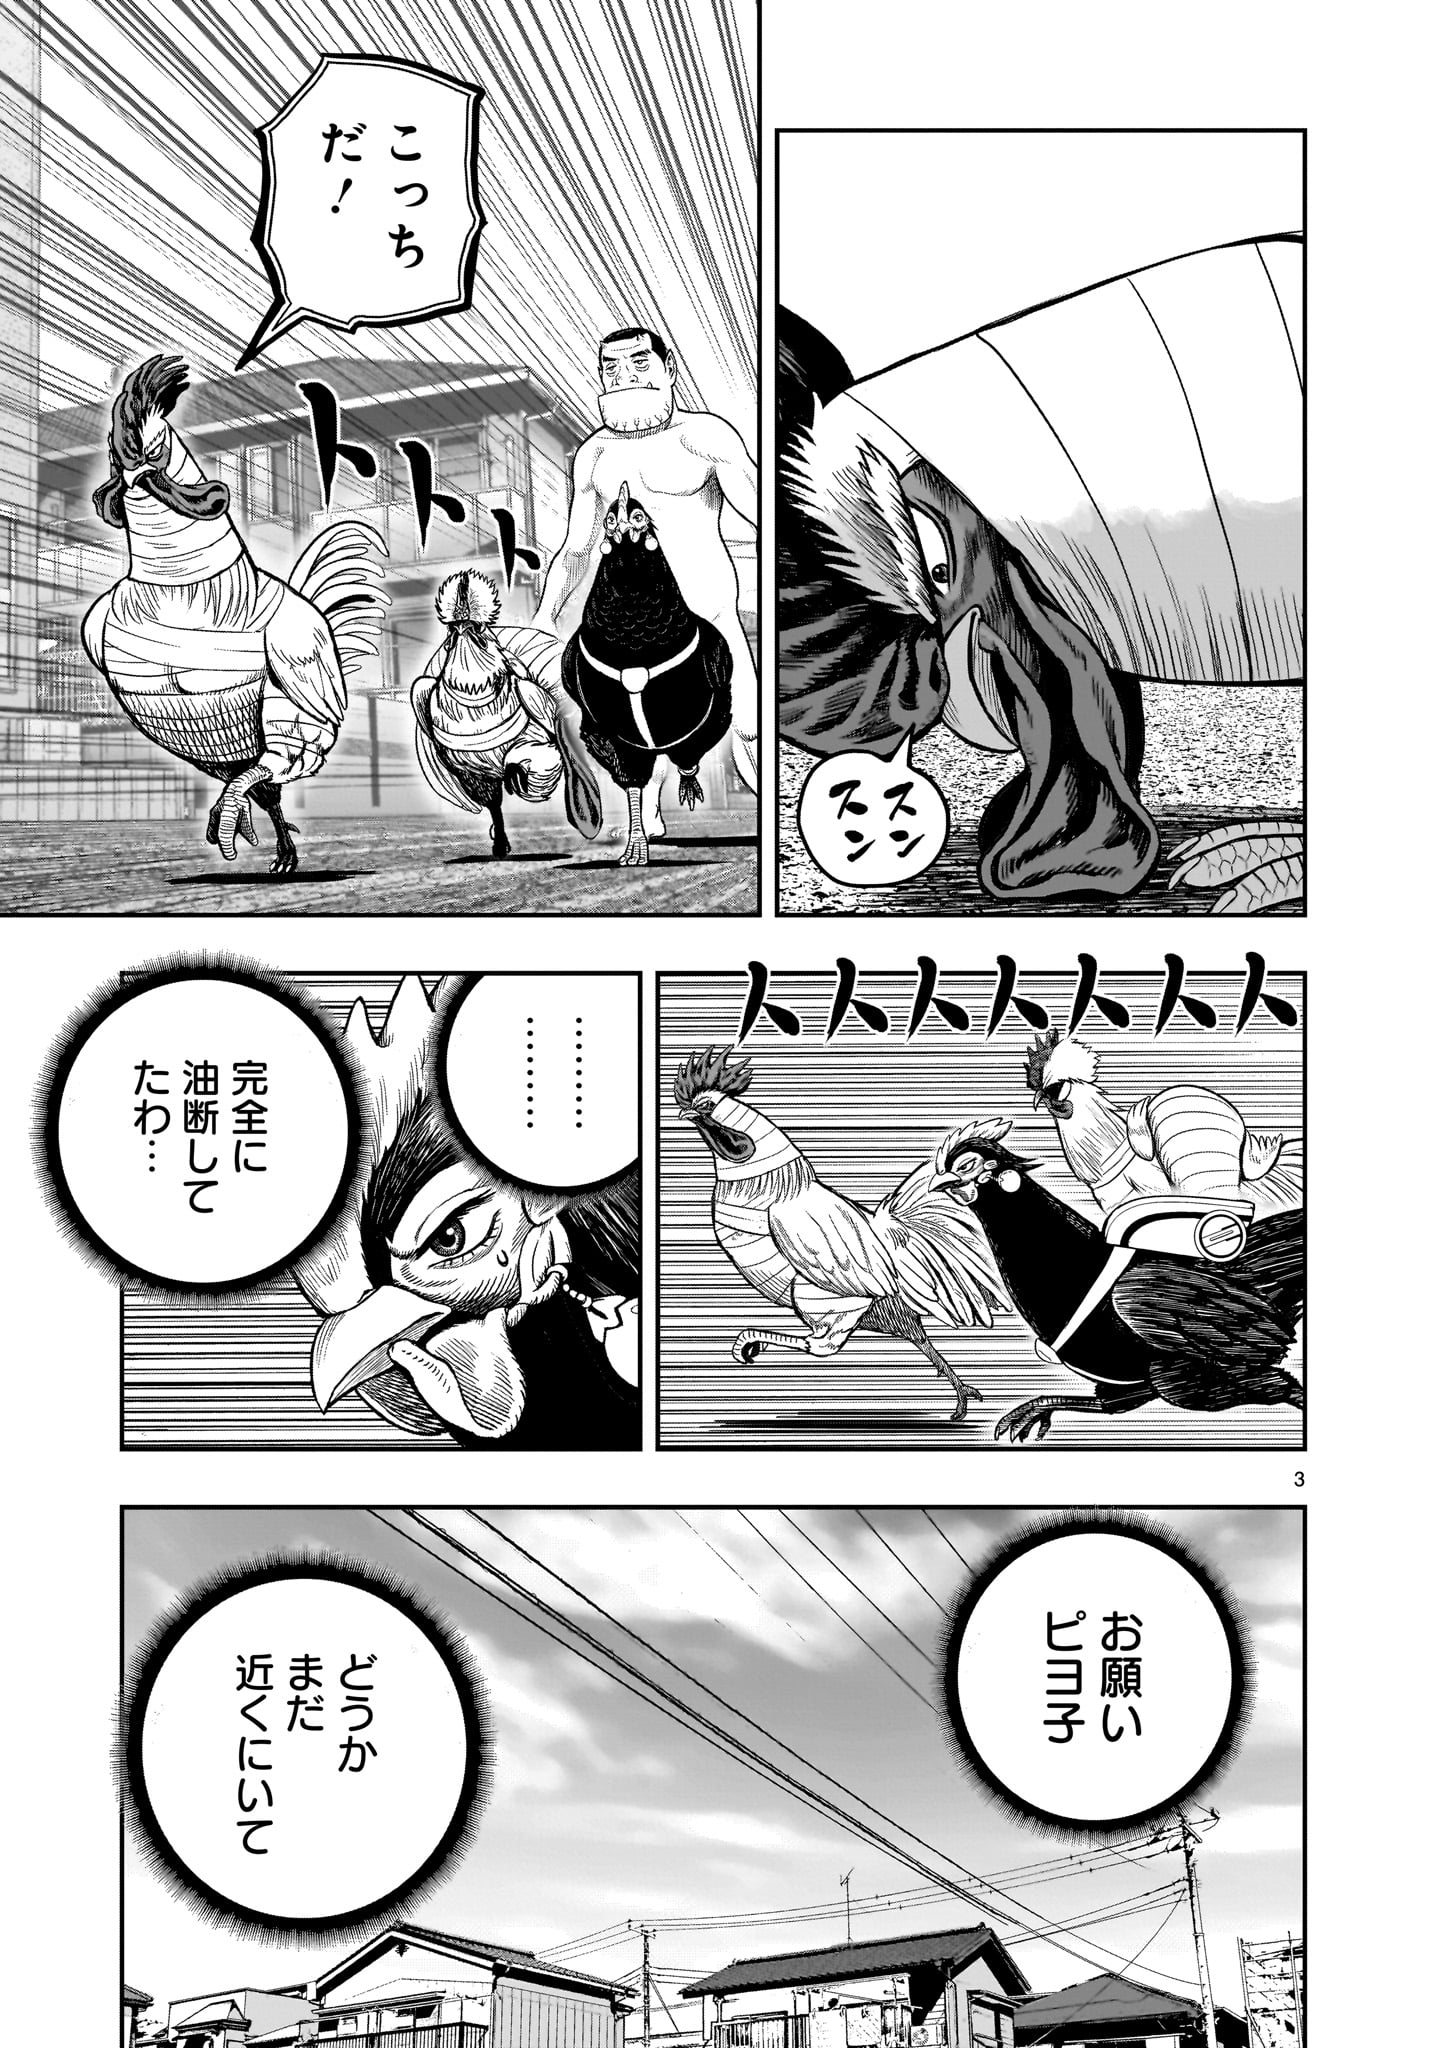 Niwatori Fighter - Chapter 34 - Page 3